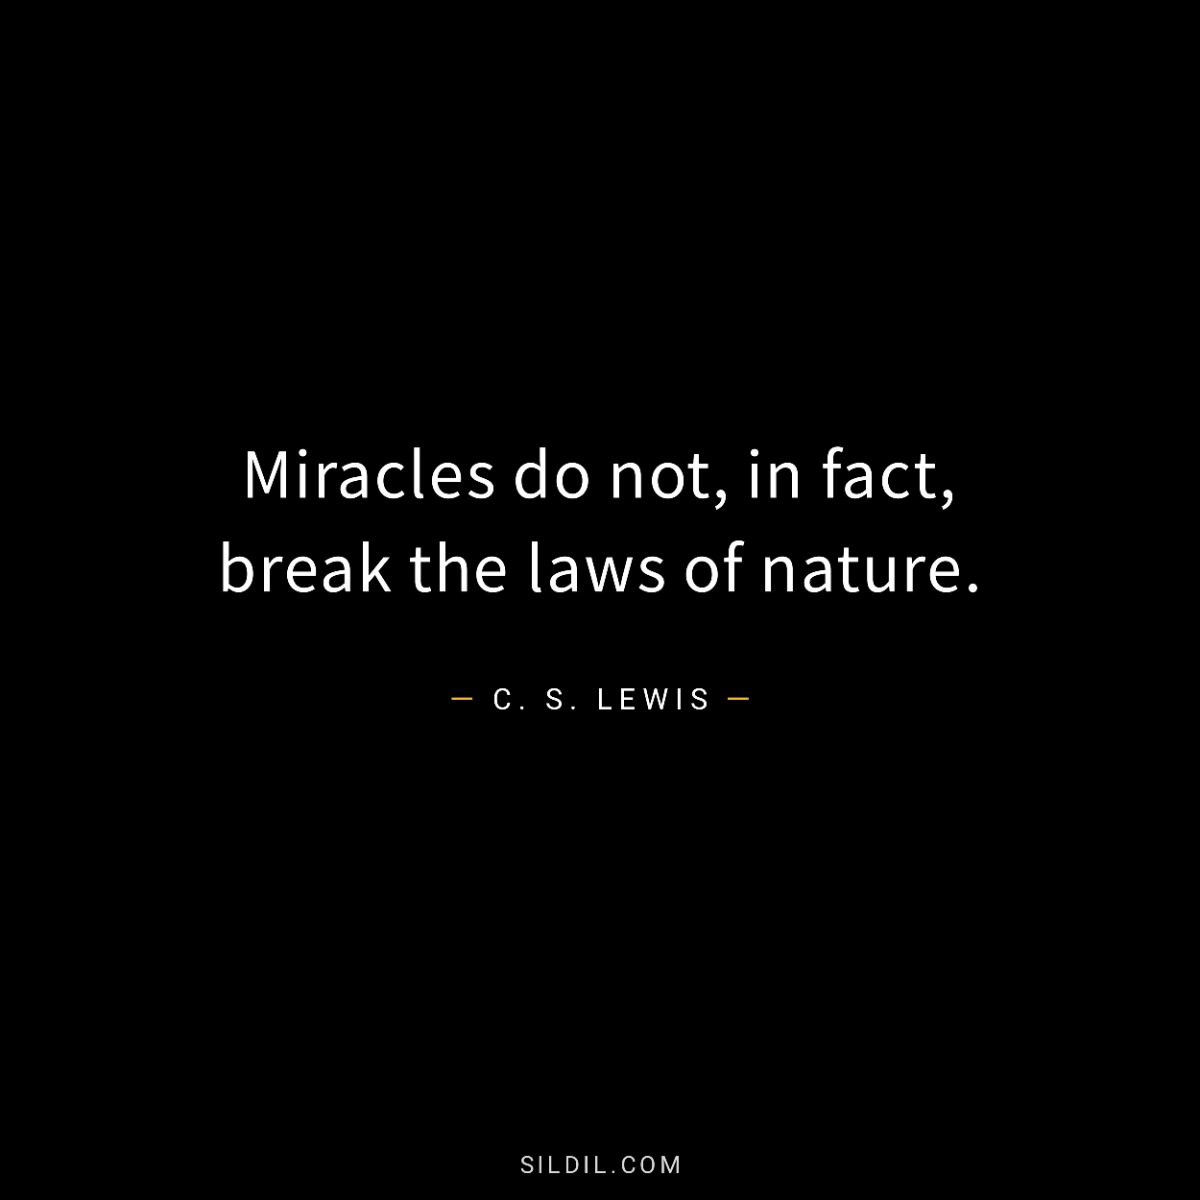 Miracles do not, in fact, break the laws of nature.